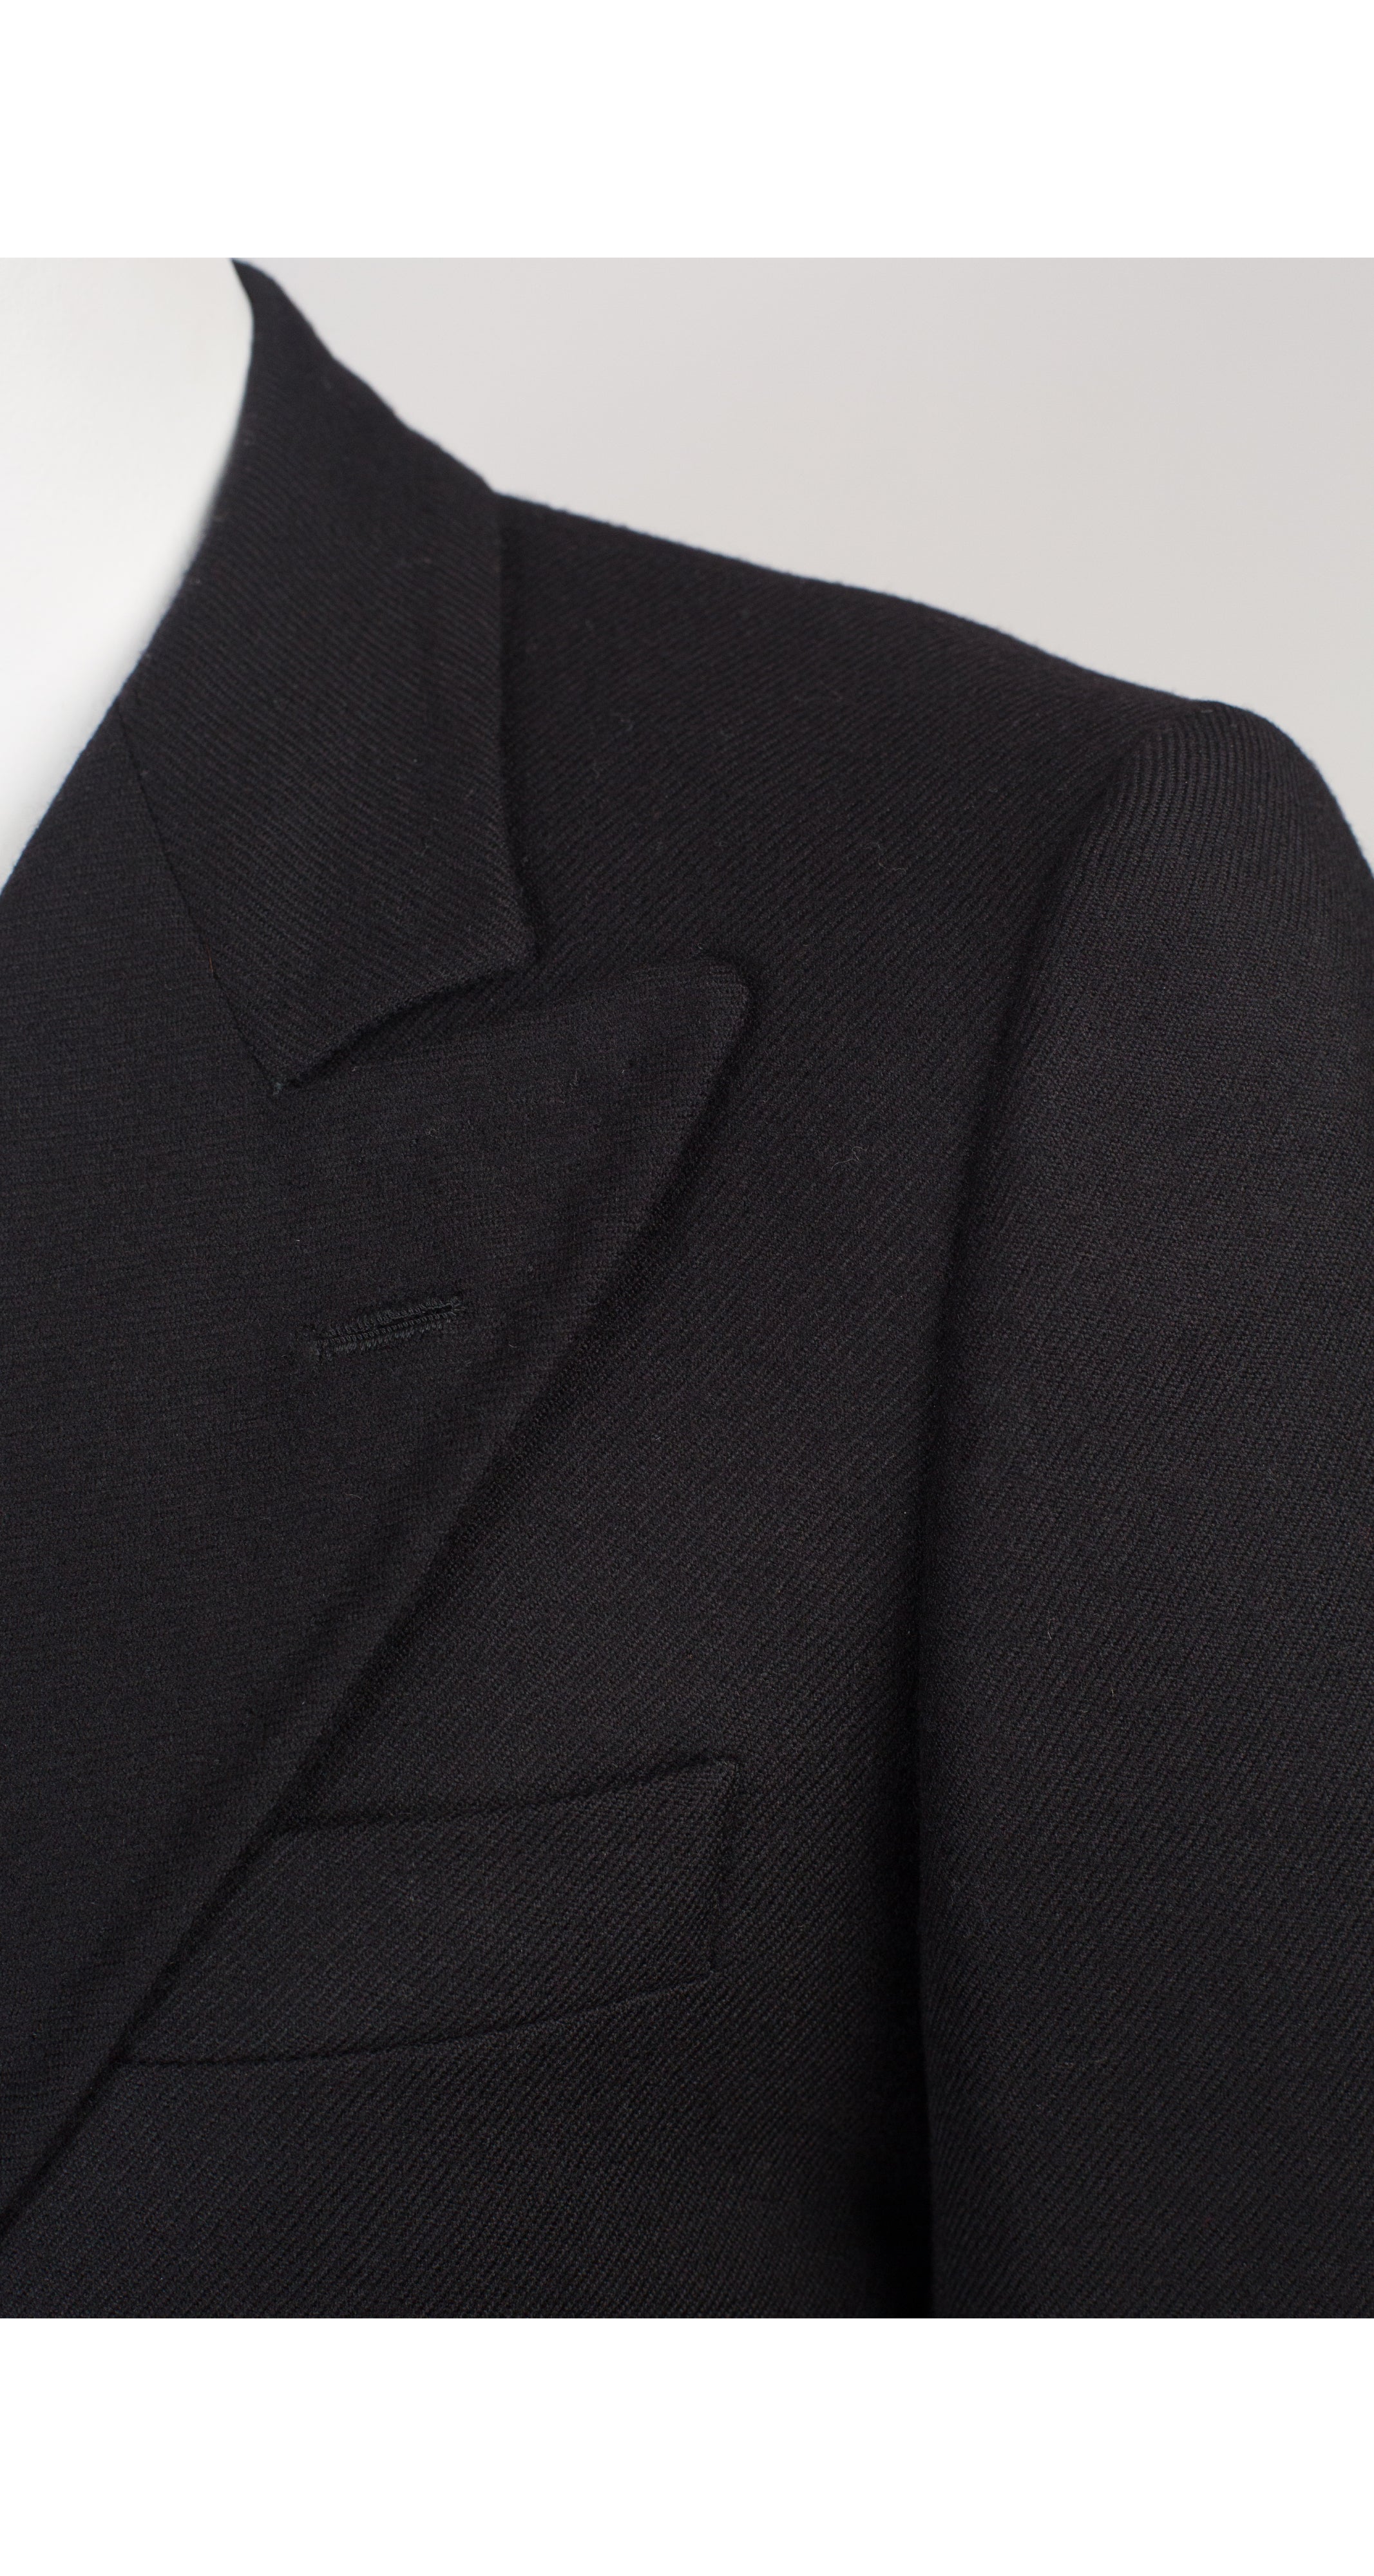 1970s Men's Black Wool Double-Breasted Suit Jacket